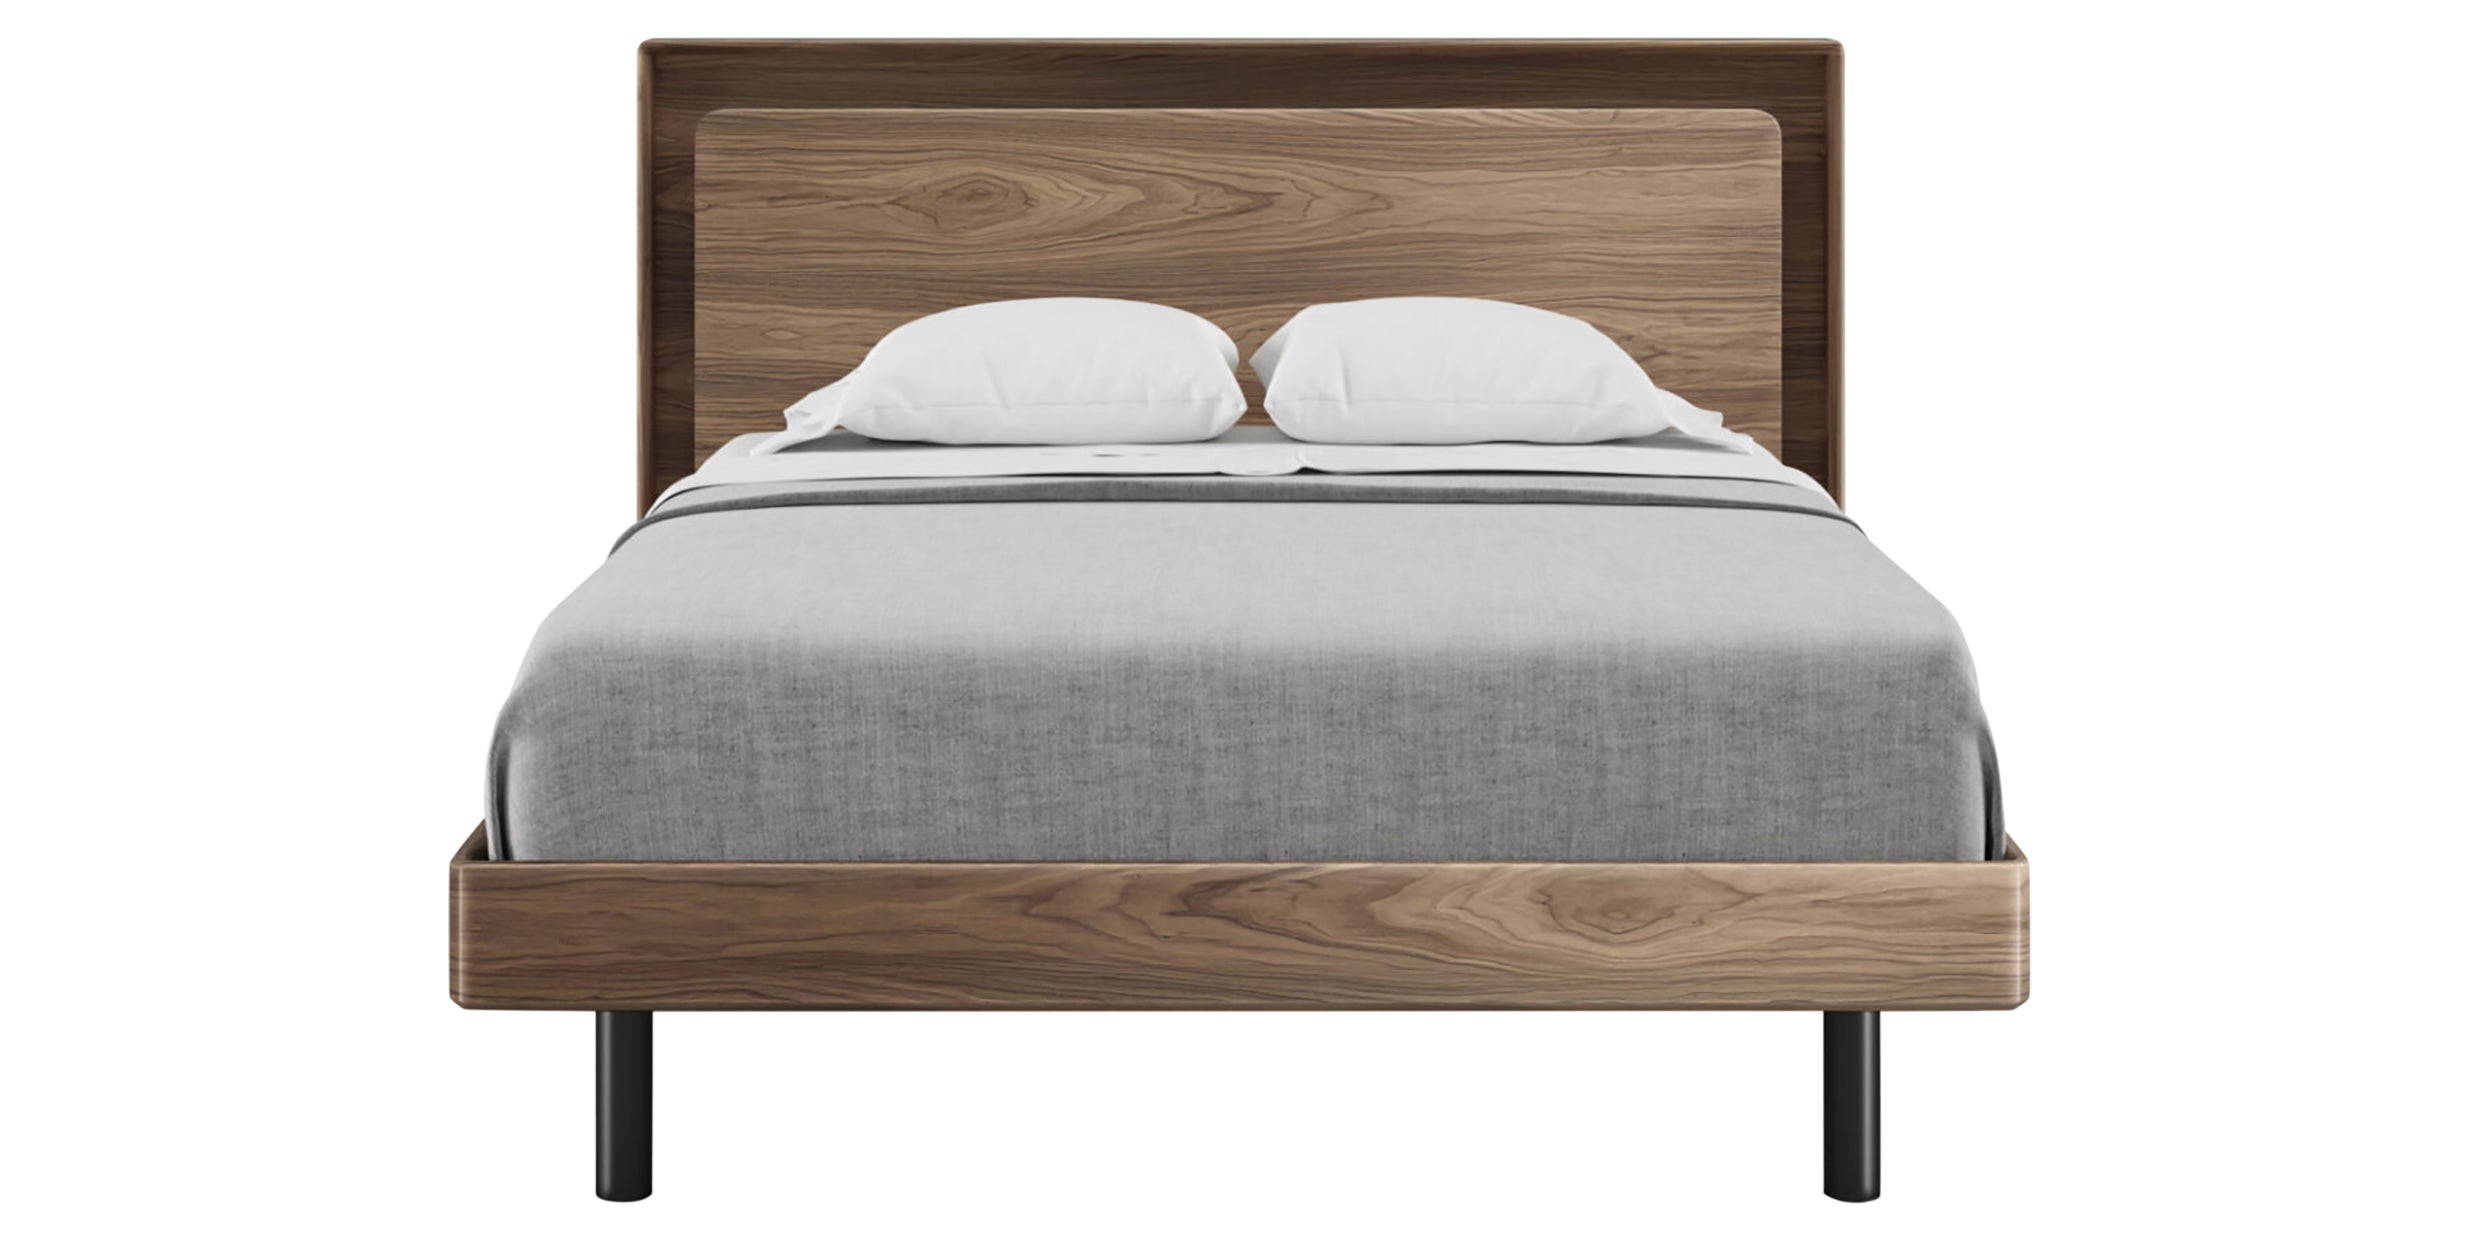 Natural Walnut with Powder Coated Steel and Solid Pine (Queen Size) | BDI Up-Linq Bed | Valley Ridge Furniture